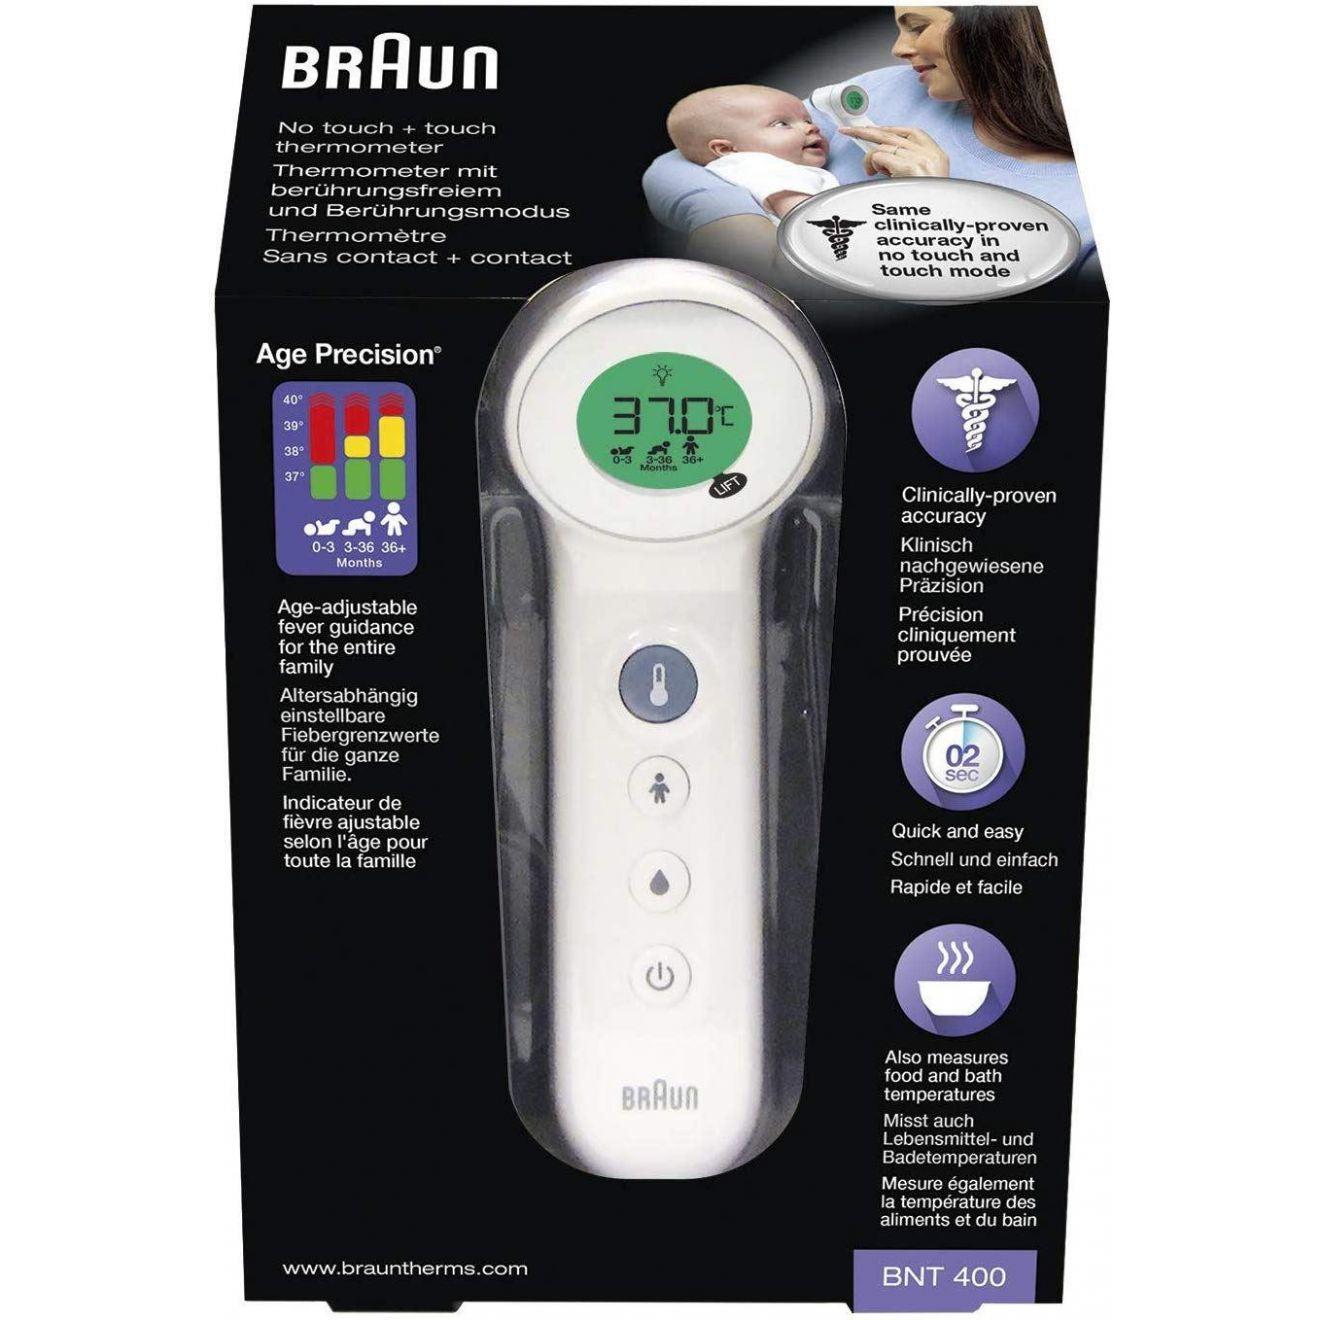 Braun No Touch + Touch thermometer with Age Precision BNT400EE - White